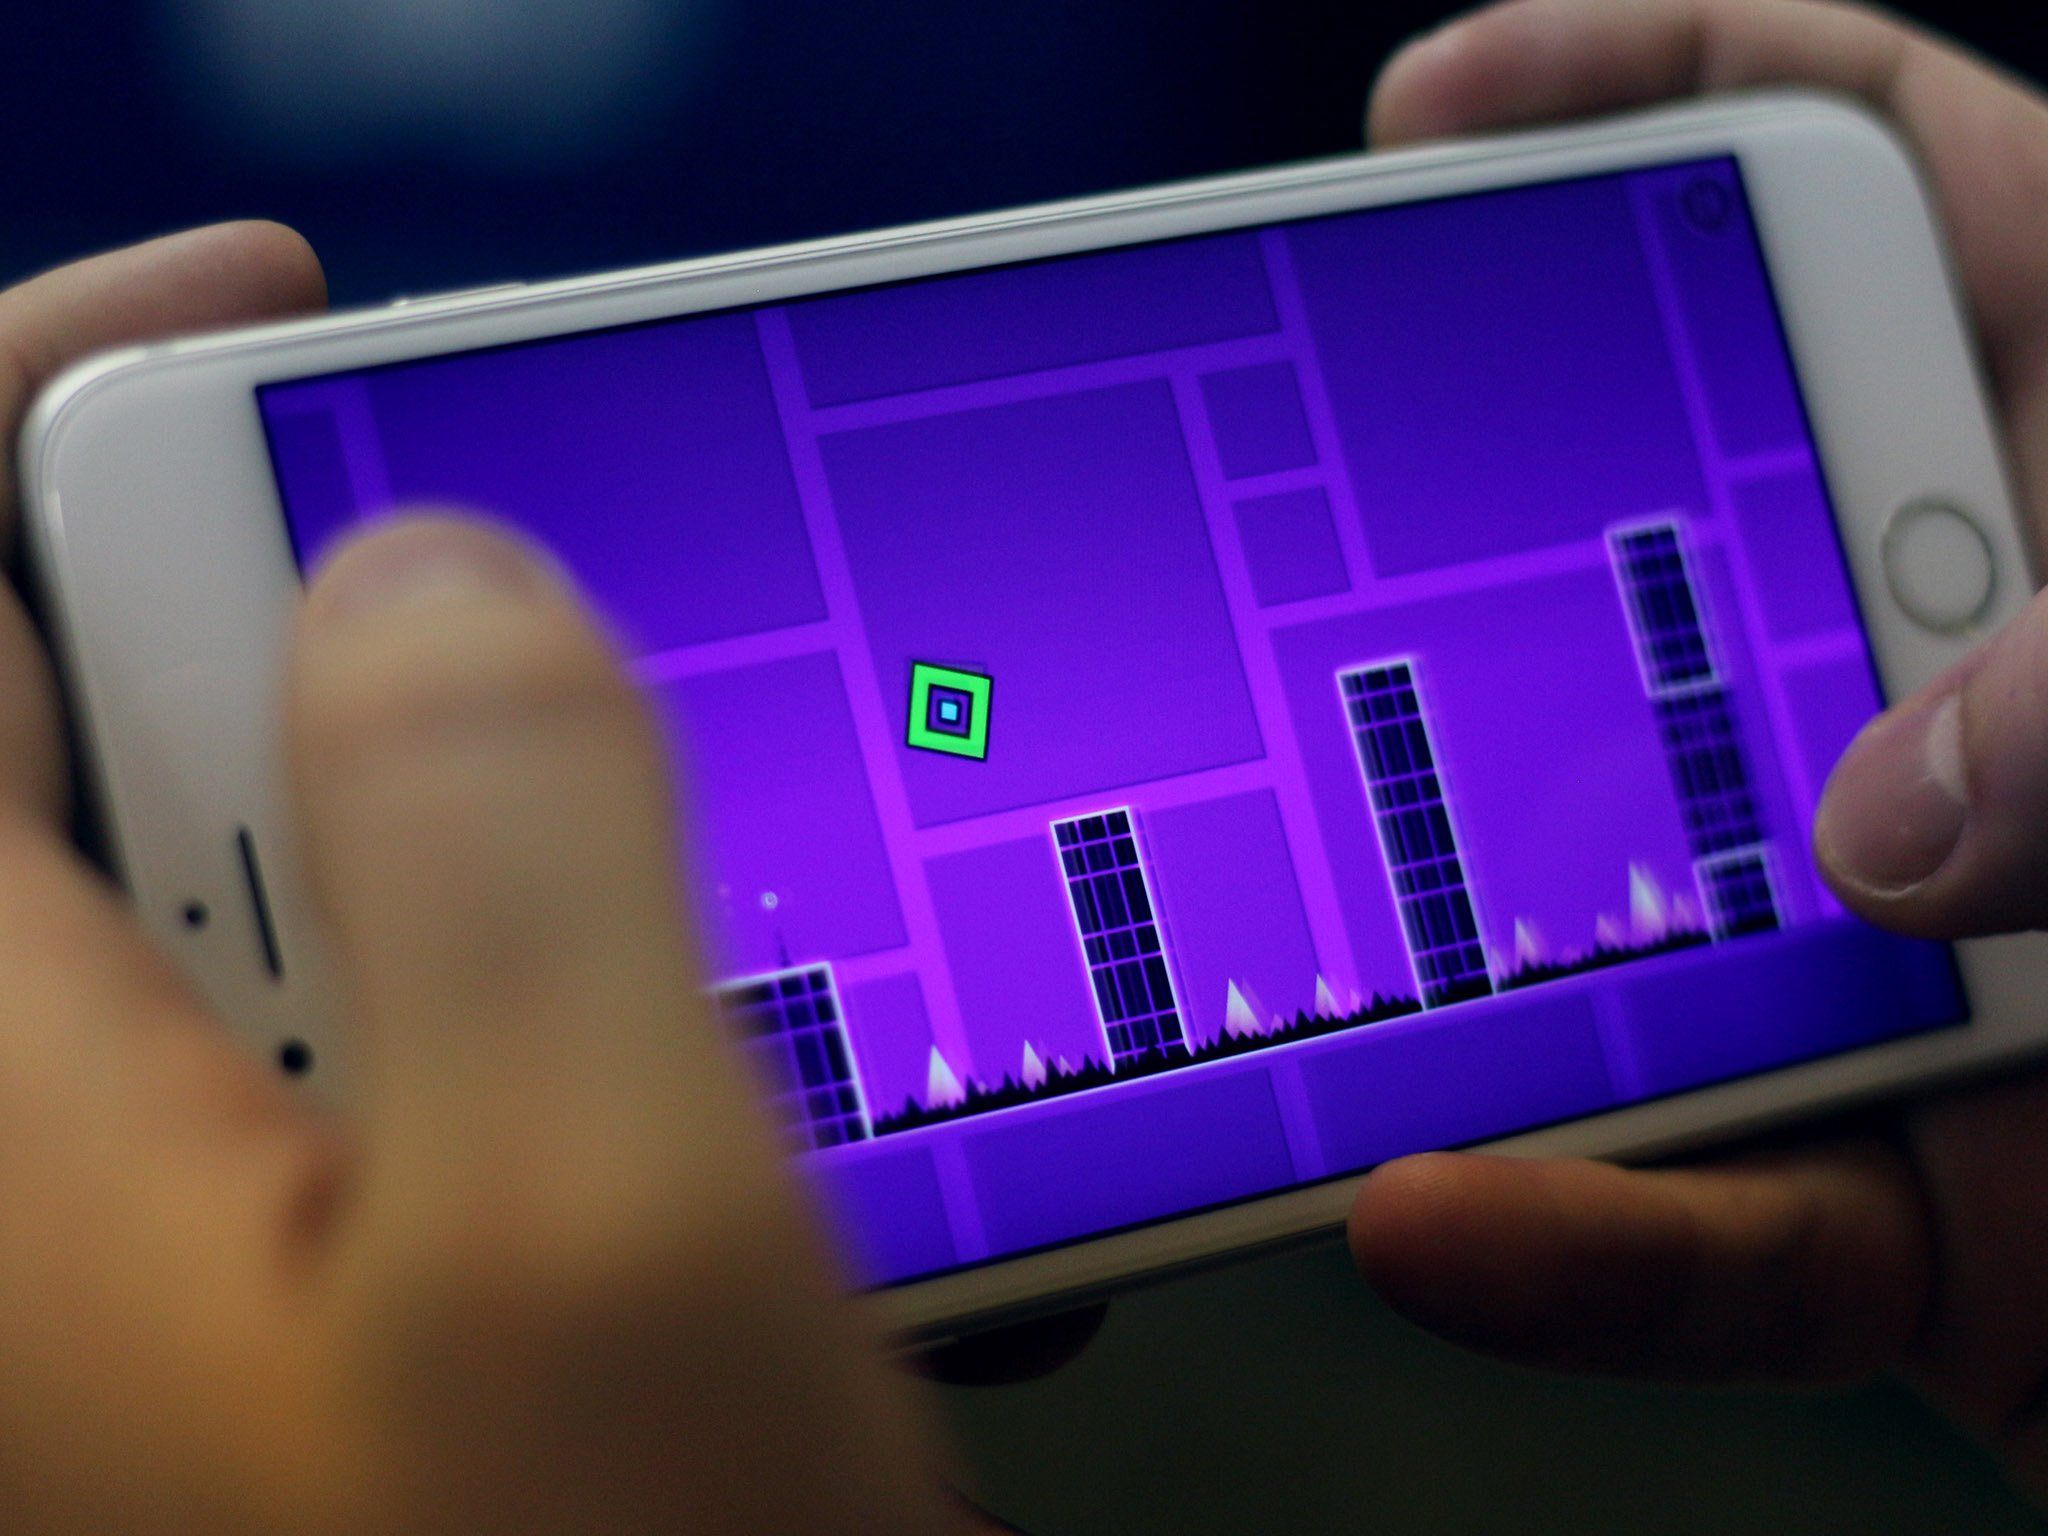 Cube: Geometry dash for Android - Free App Download